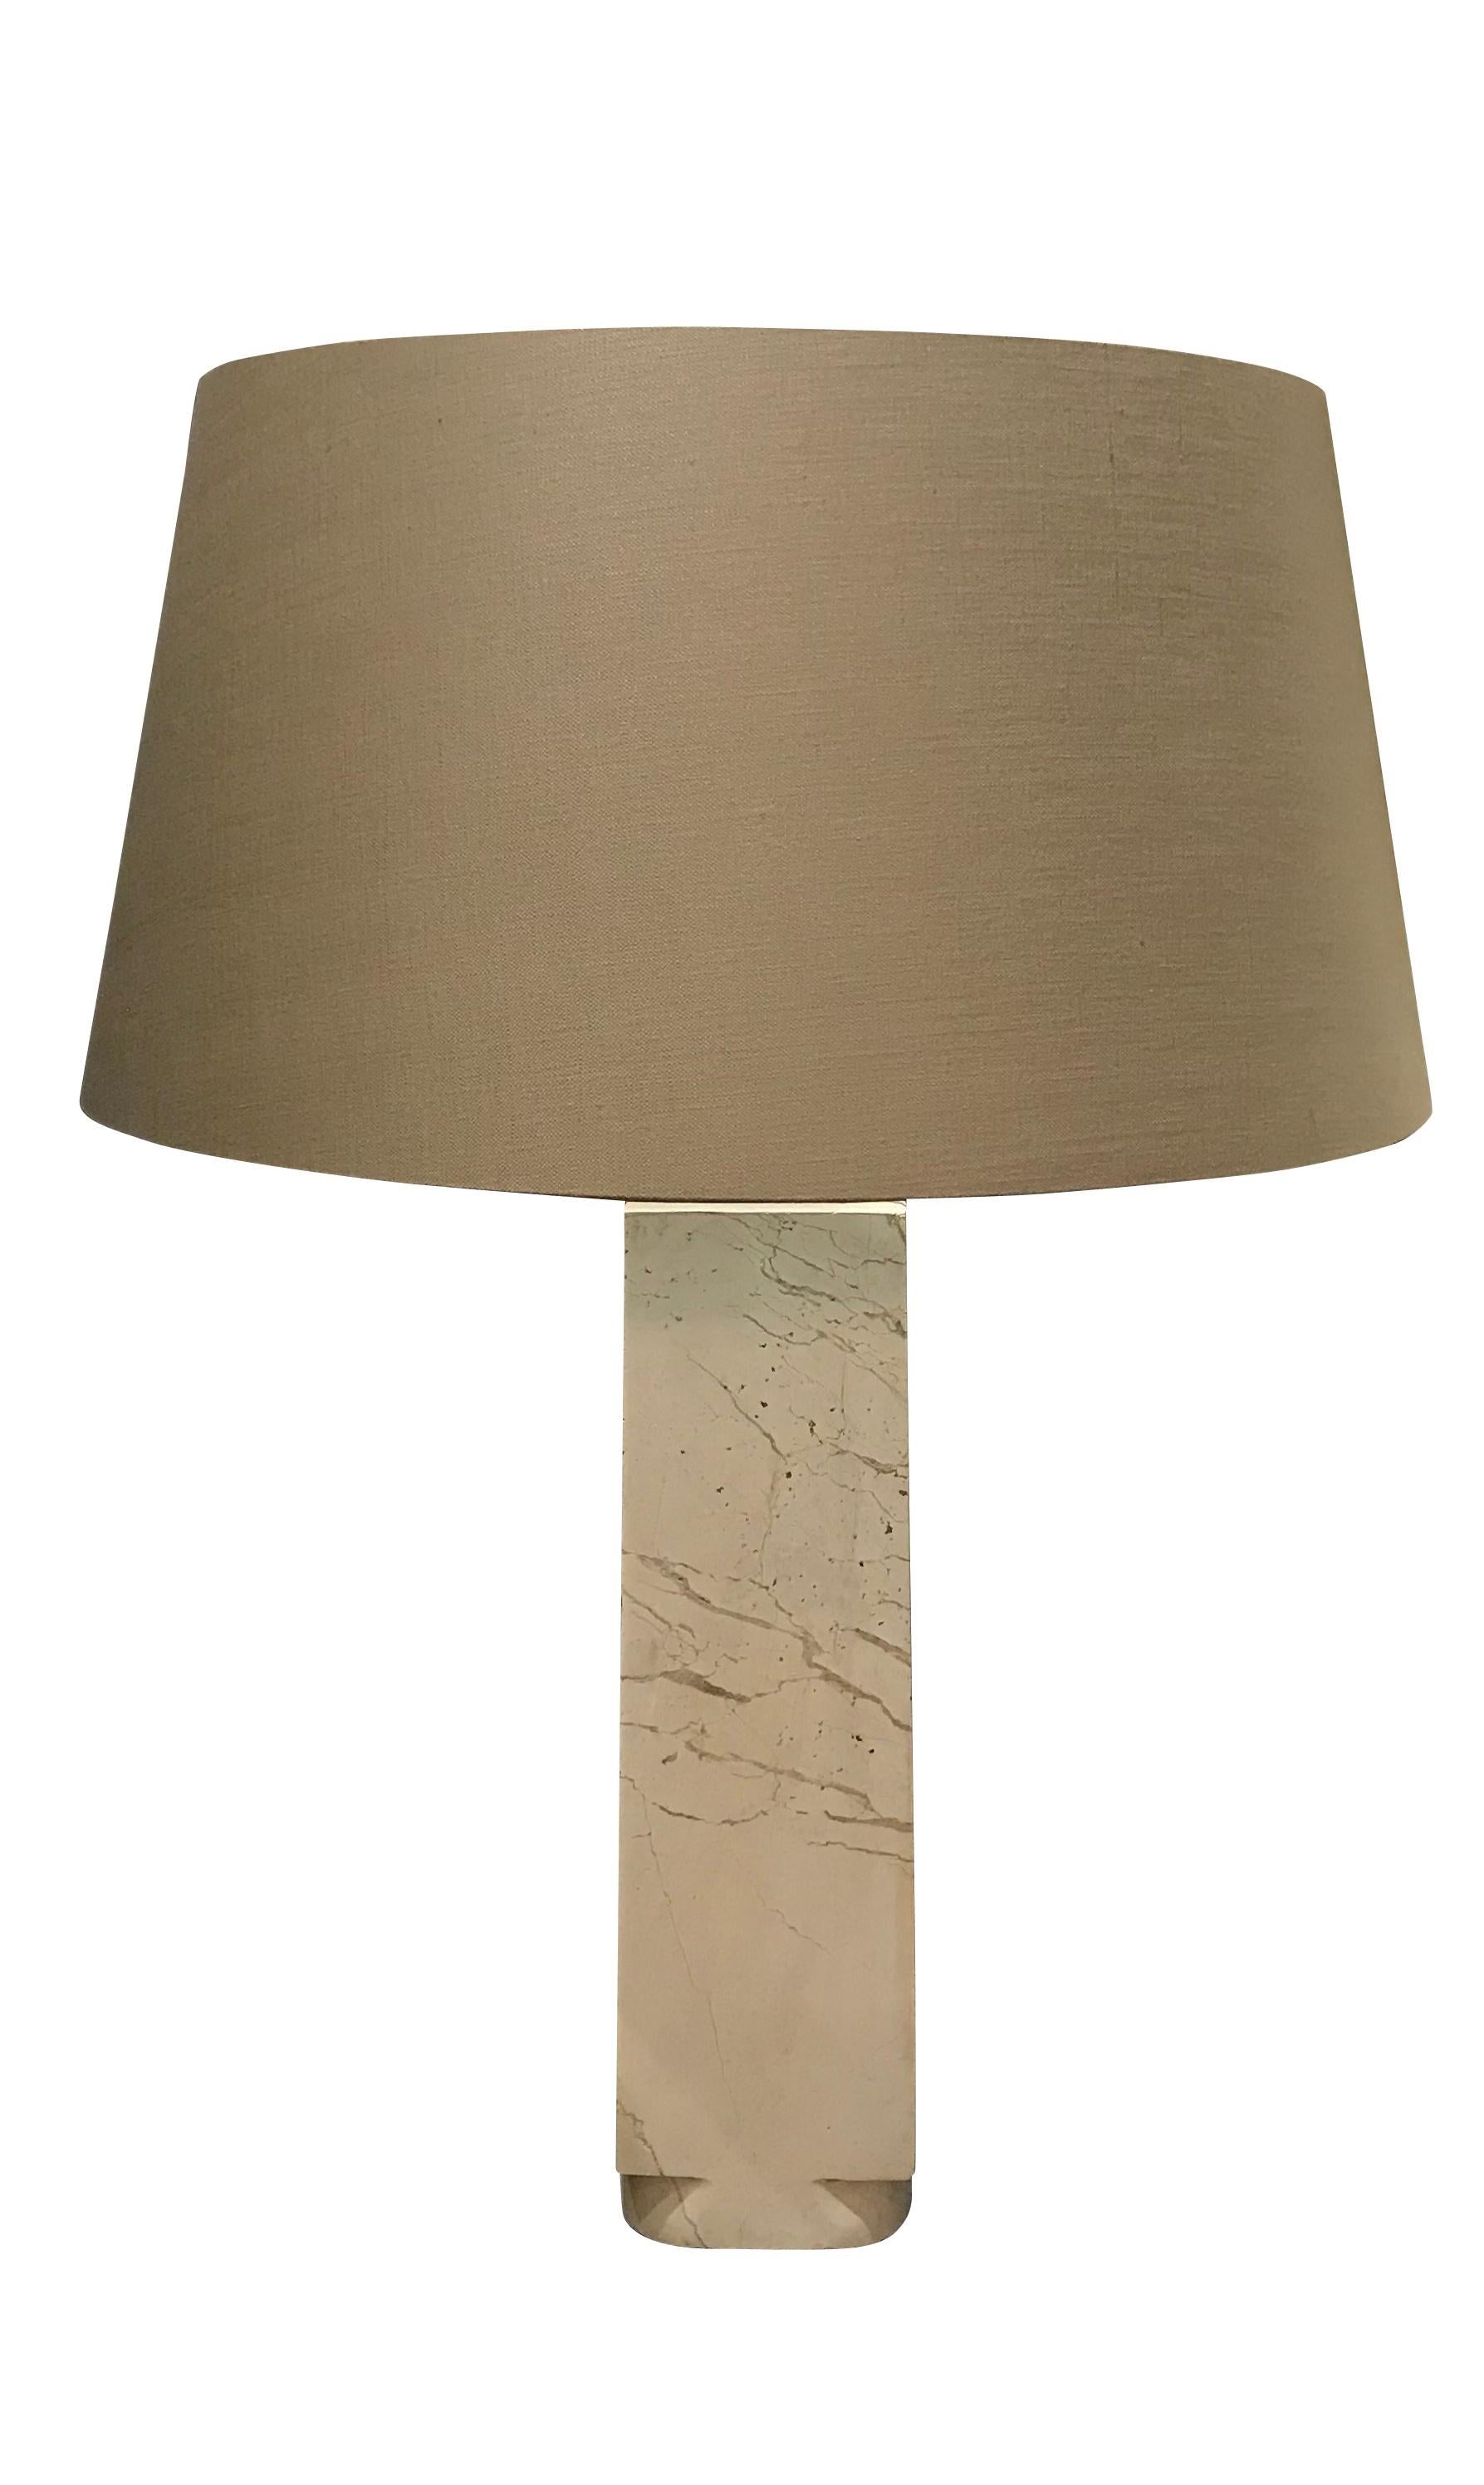 Contemporary pair of tall white marble lamps
Square shaped base
New taupe fine linen shade
Measures: Overall height 27.5